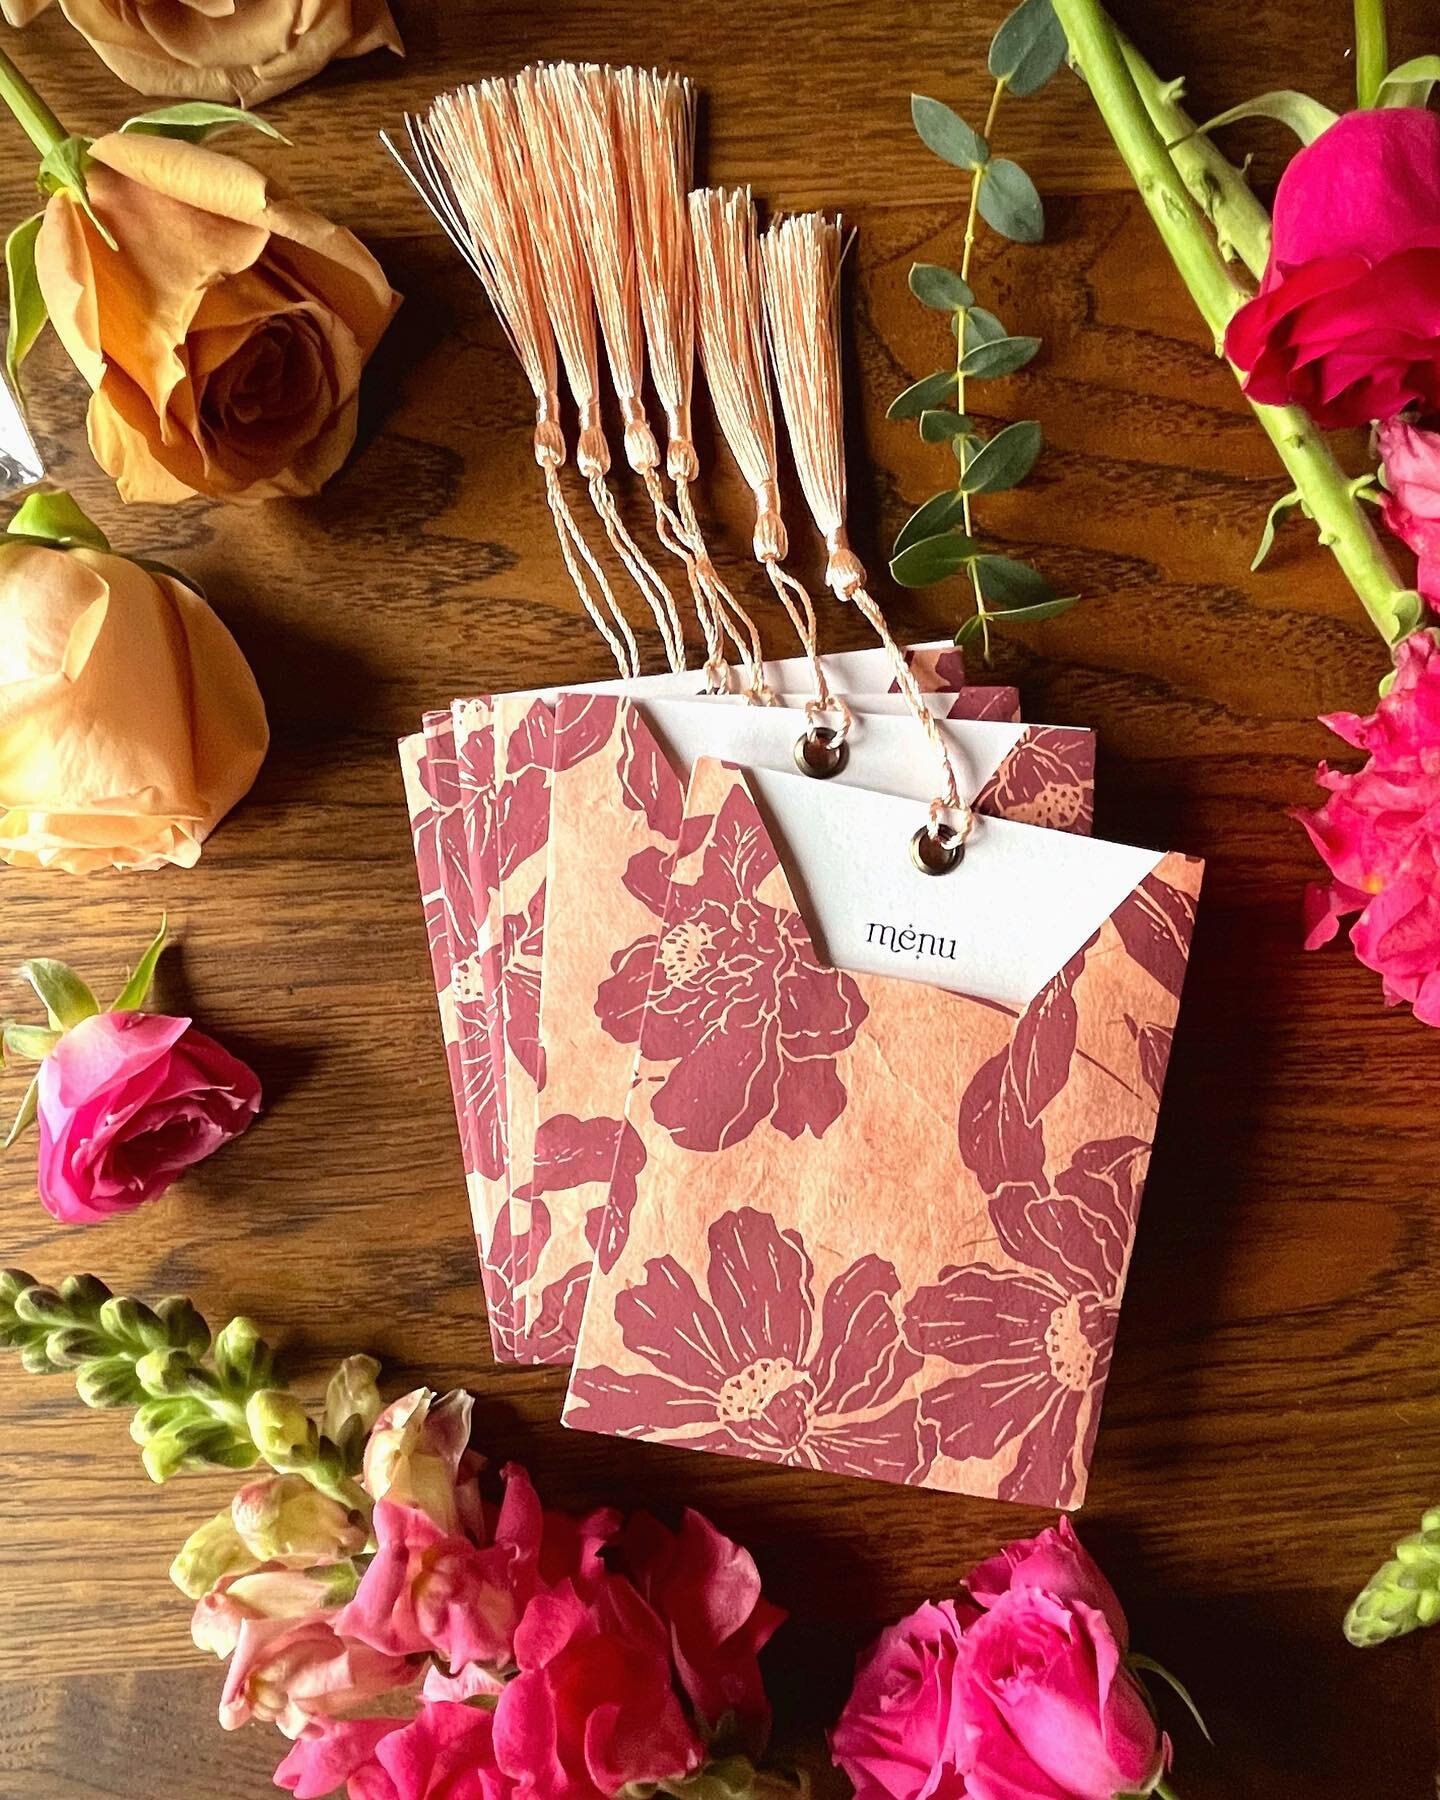 🌷Garden Party🌷 
Pullout pocket menus created from heavy, handmade paper with silk tassels. Add fun menus to your event for some tangible charm! 
(I love them so much🥰)

@harvestmoonpond_venue 
@melodyrosedesignswi 
@festpaper 
@larissamariephoto 
